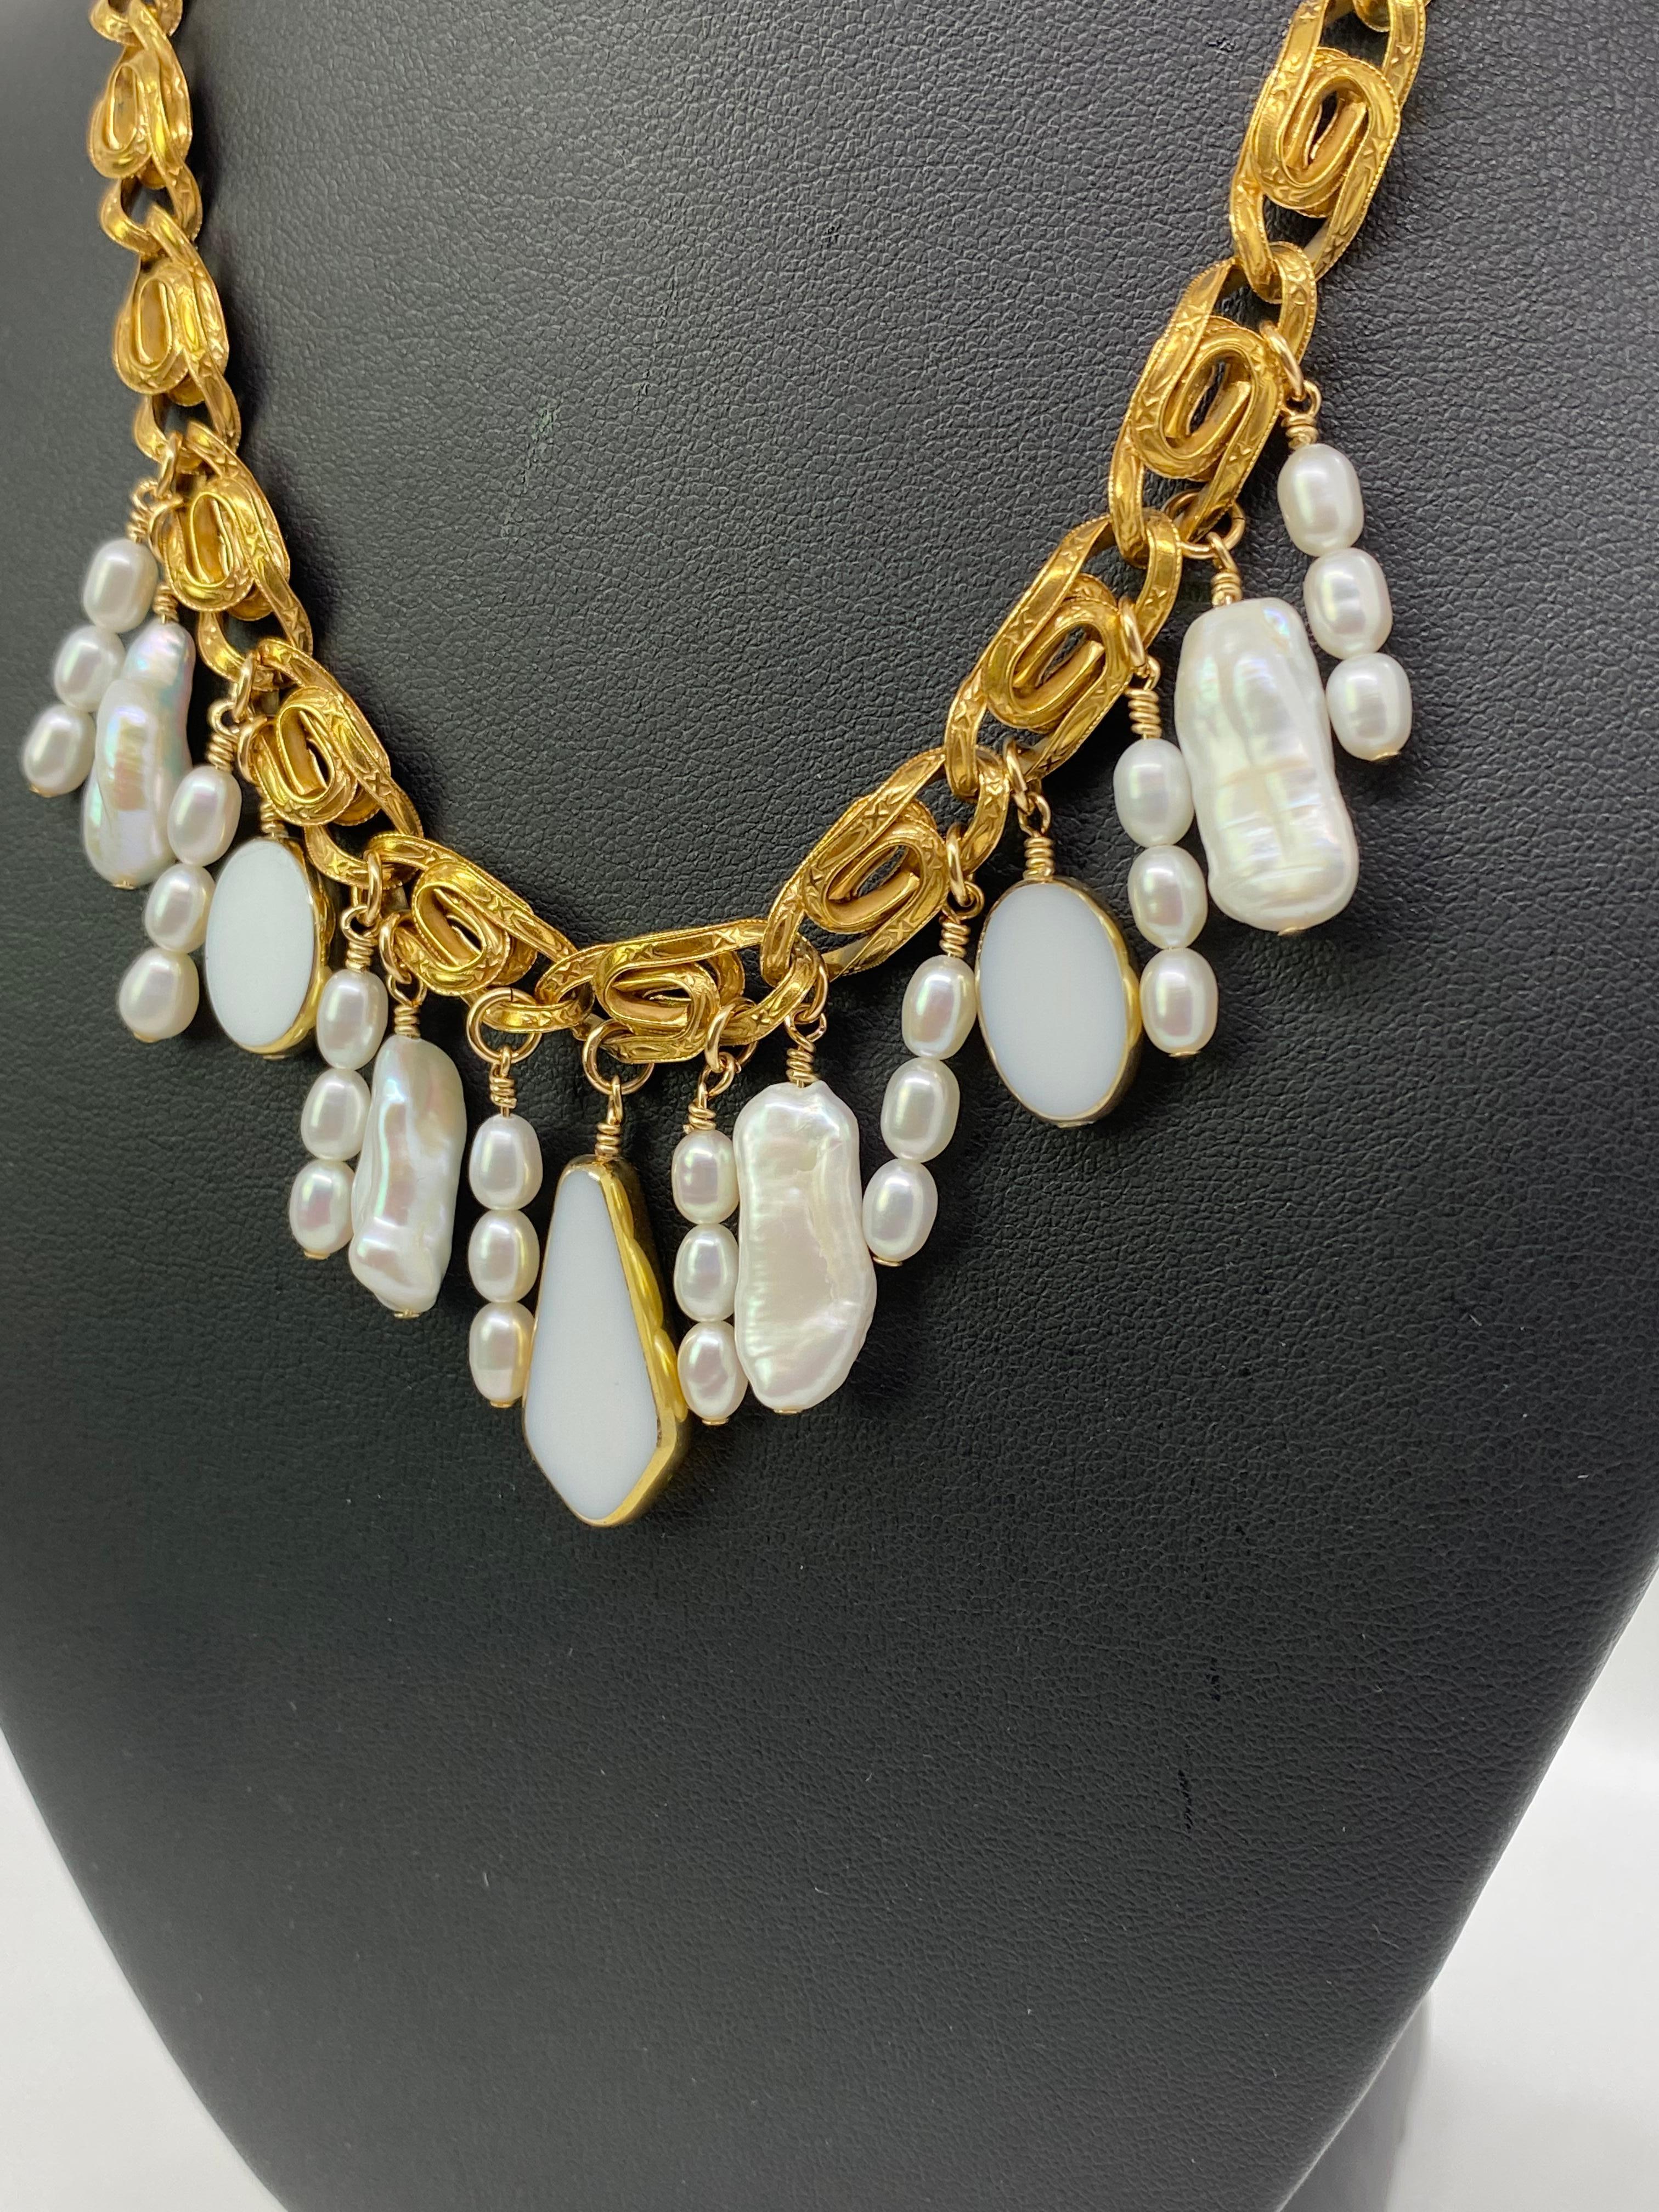 Contemporary Antique Chain adorned with German Glass Beads & Pearls, Entwine Necklace For Sale